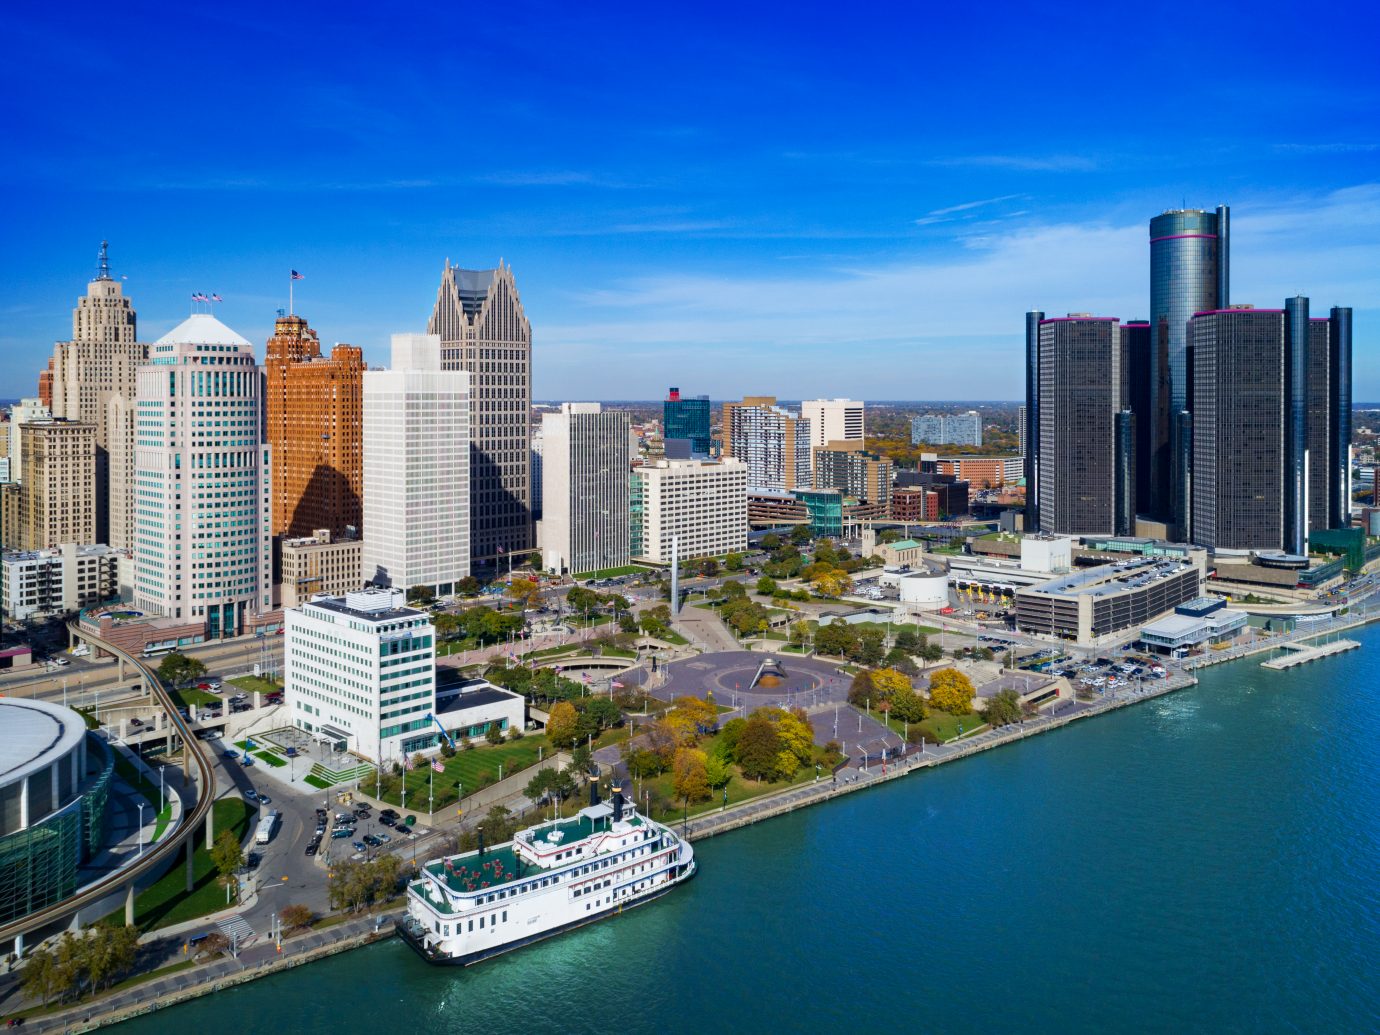 Downtown Detroit Aerial with Detroit River and a riverboat ferry in the foreground.